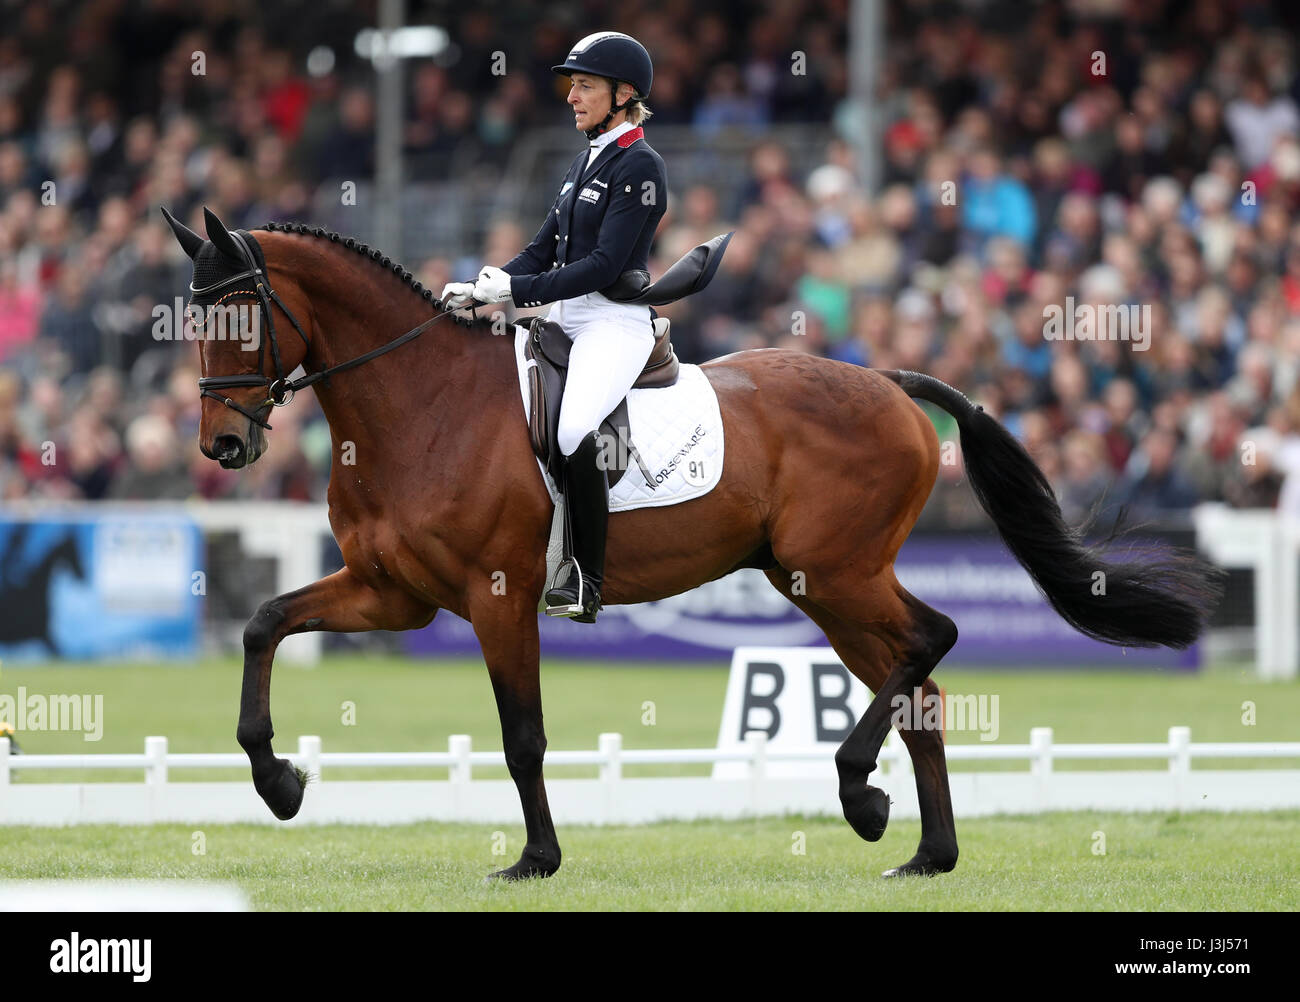 Germany's Ingrid Klimke on Hale Bob Old during the dressage phase on day  three of the 2017 Badminton Horse Trials Stock Photo - Alamy